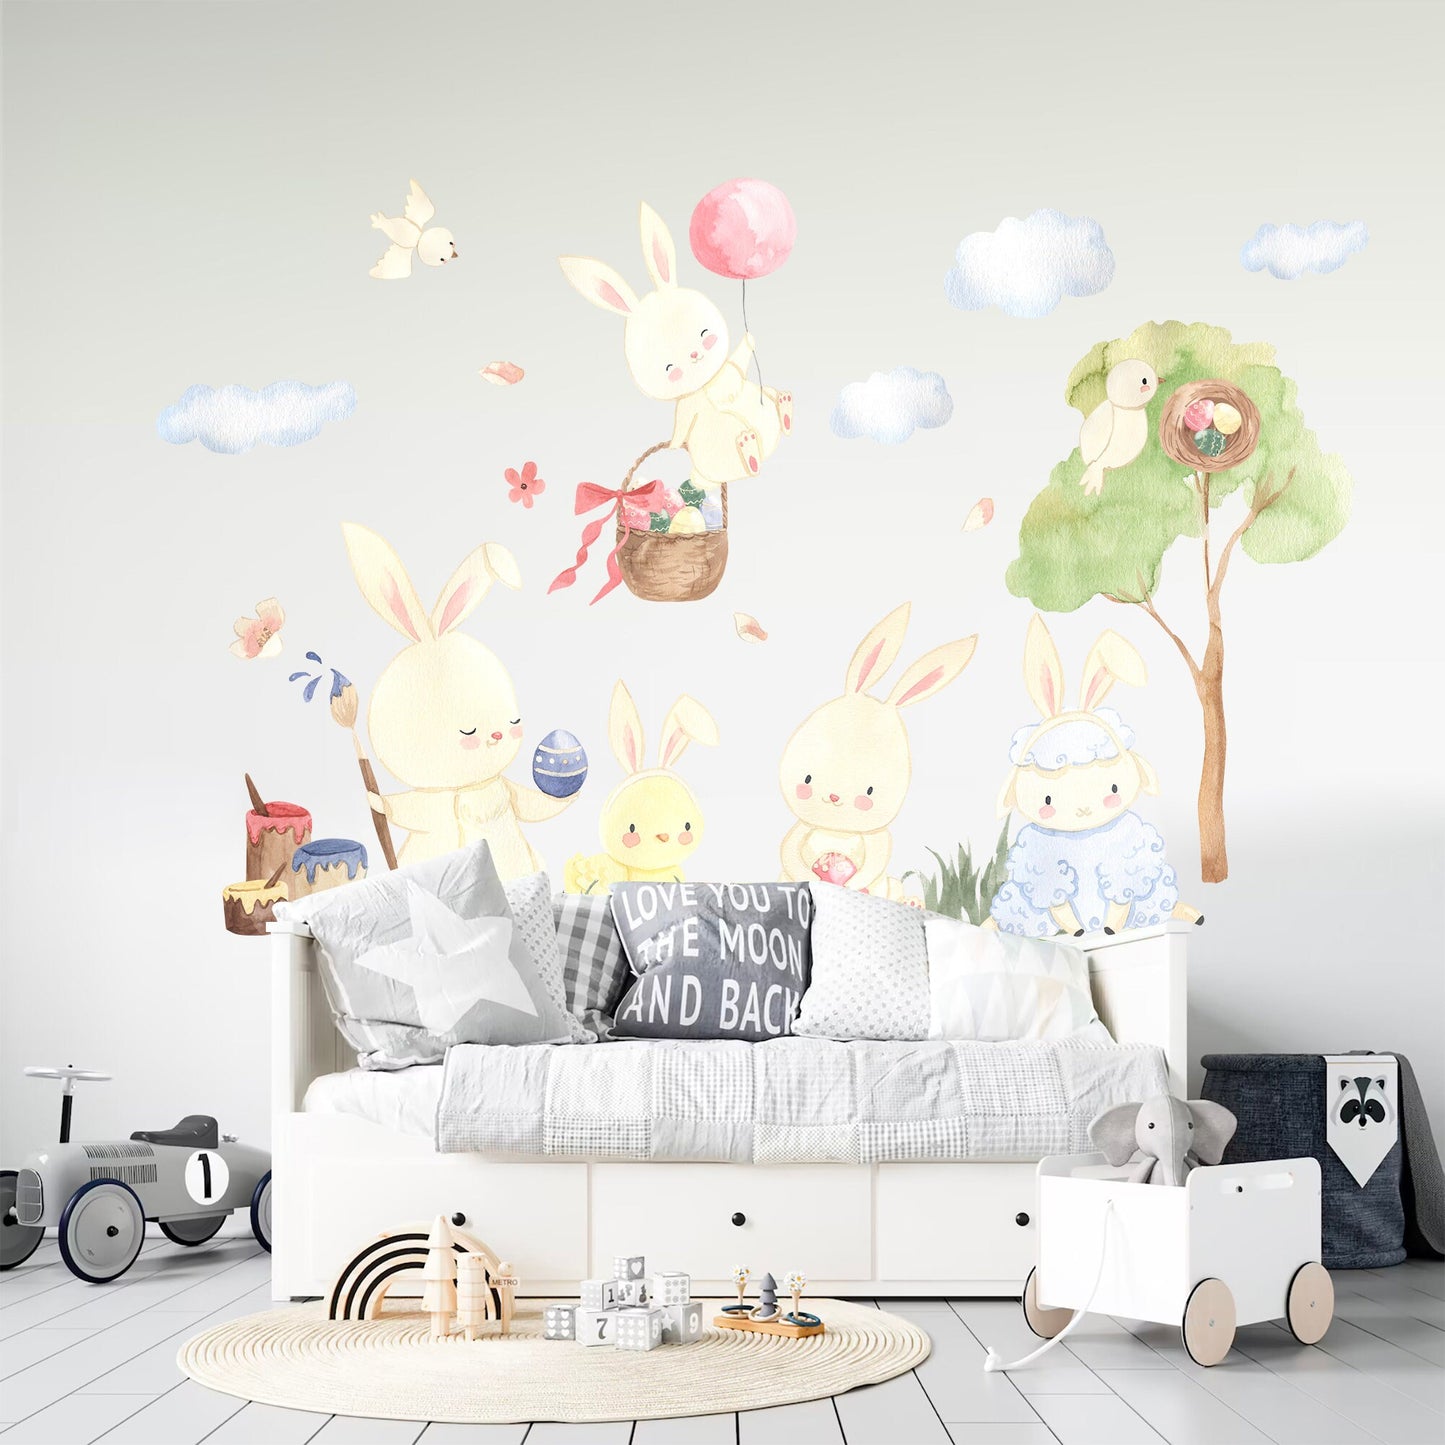 Watercolor Balloon Easter Bunny Celebration Happy Egg Wall Decal - BR140